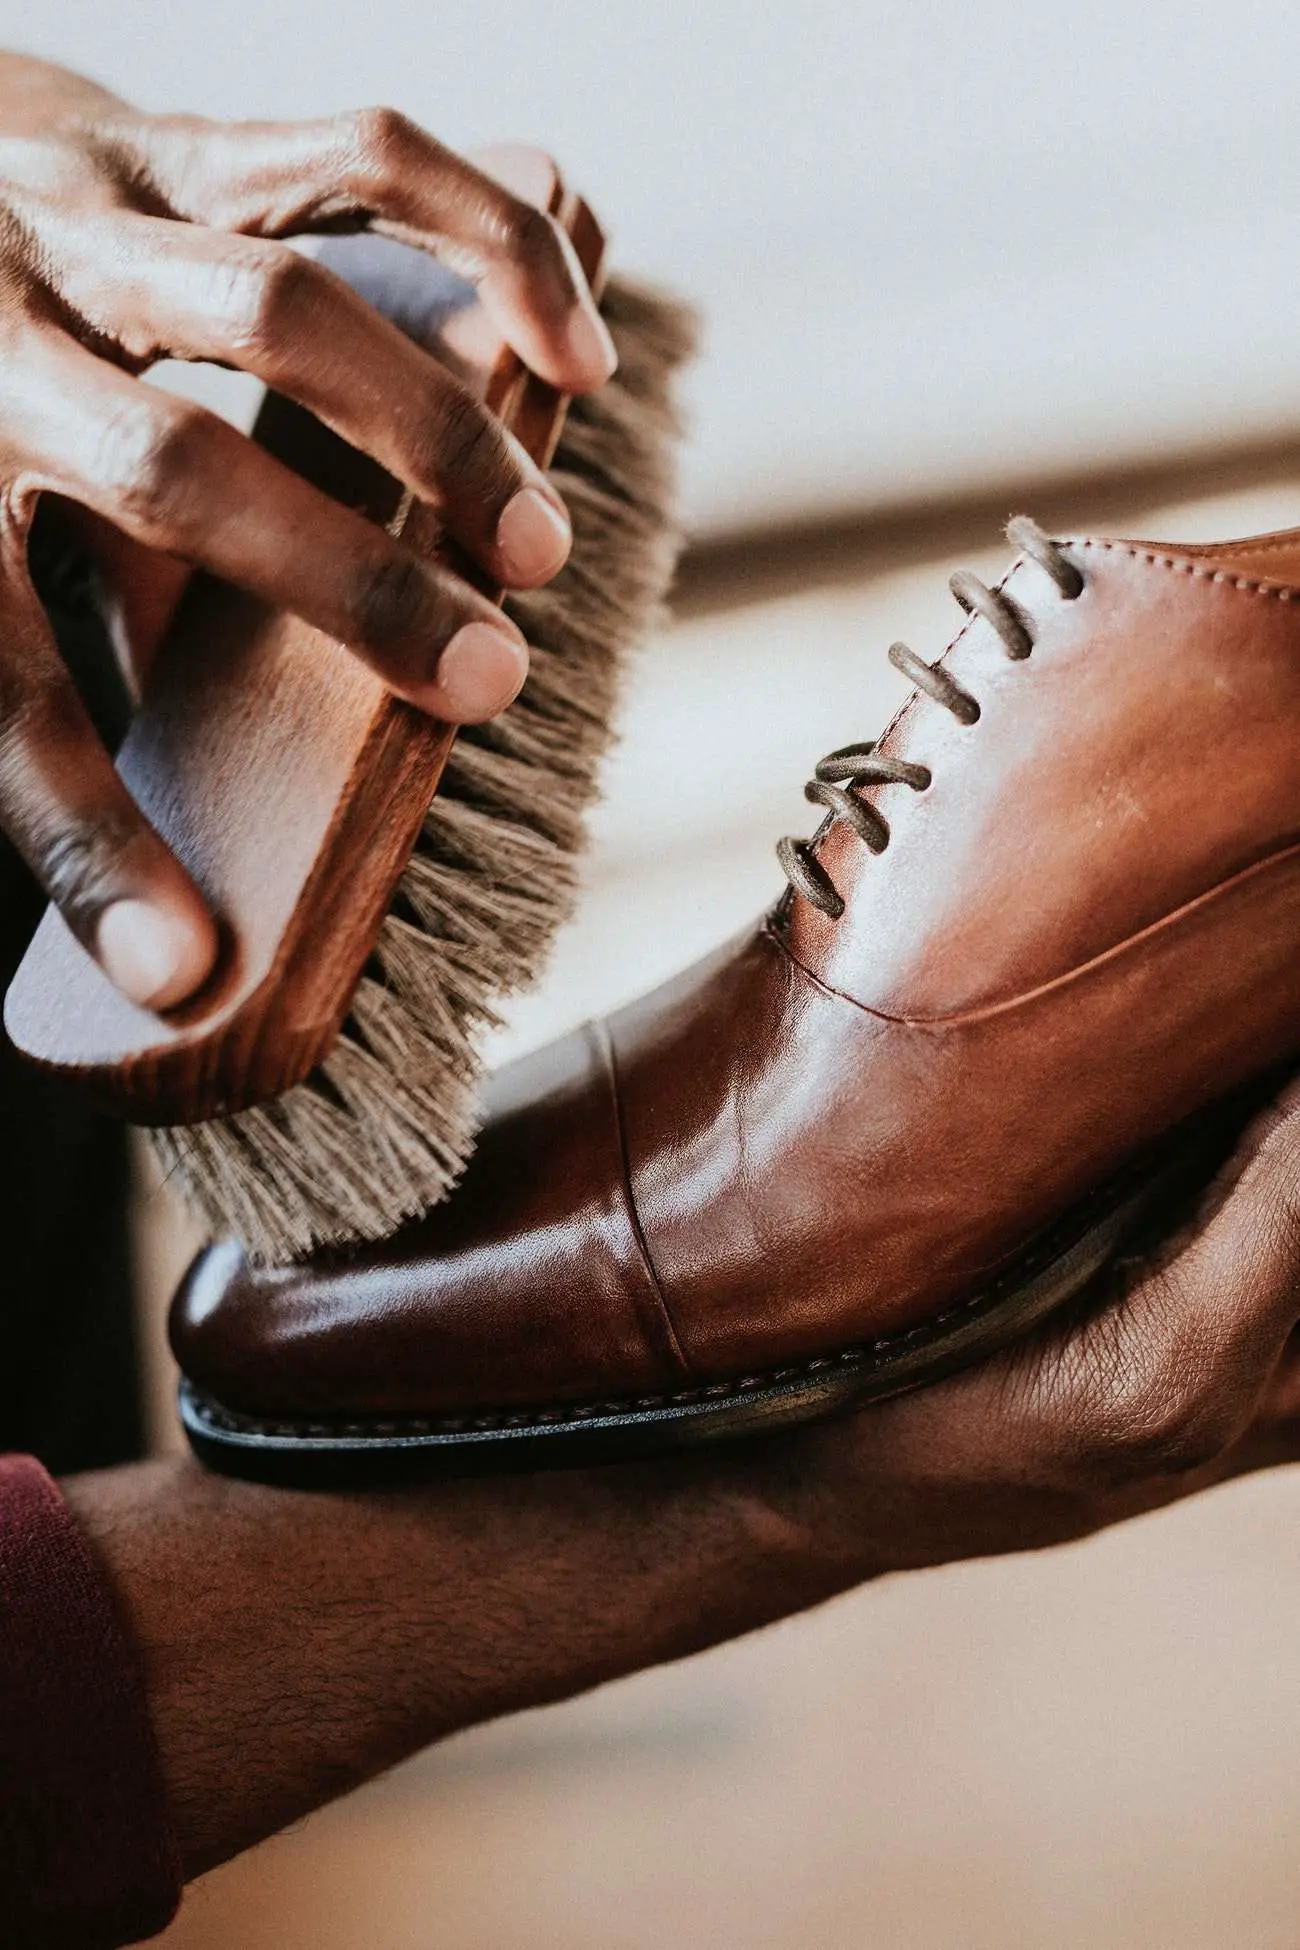 Polishing brown leather shoes